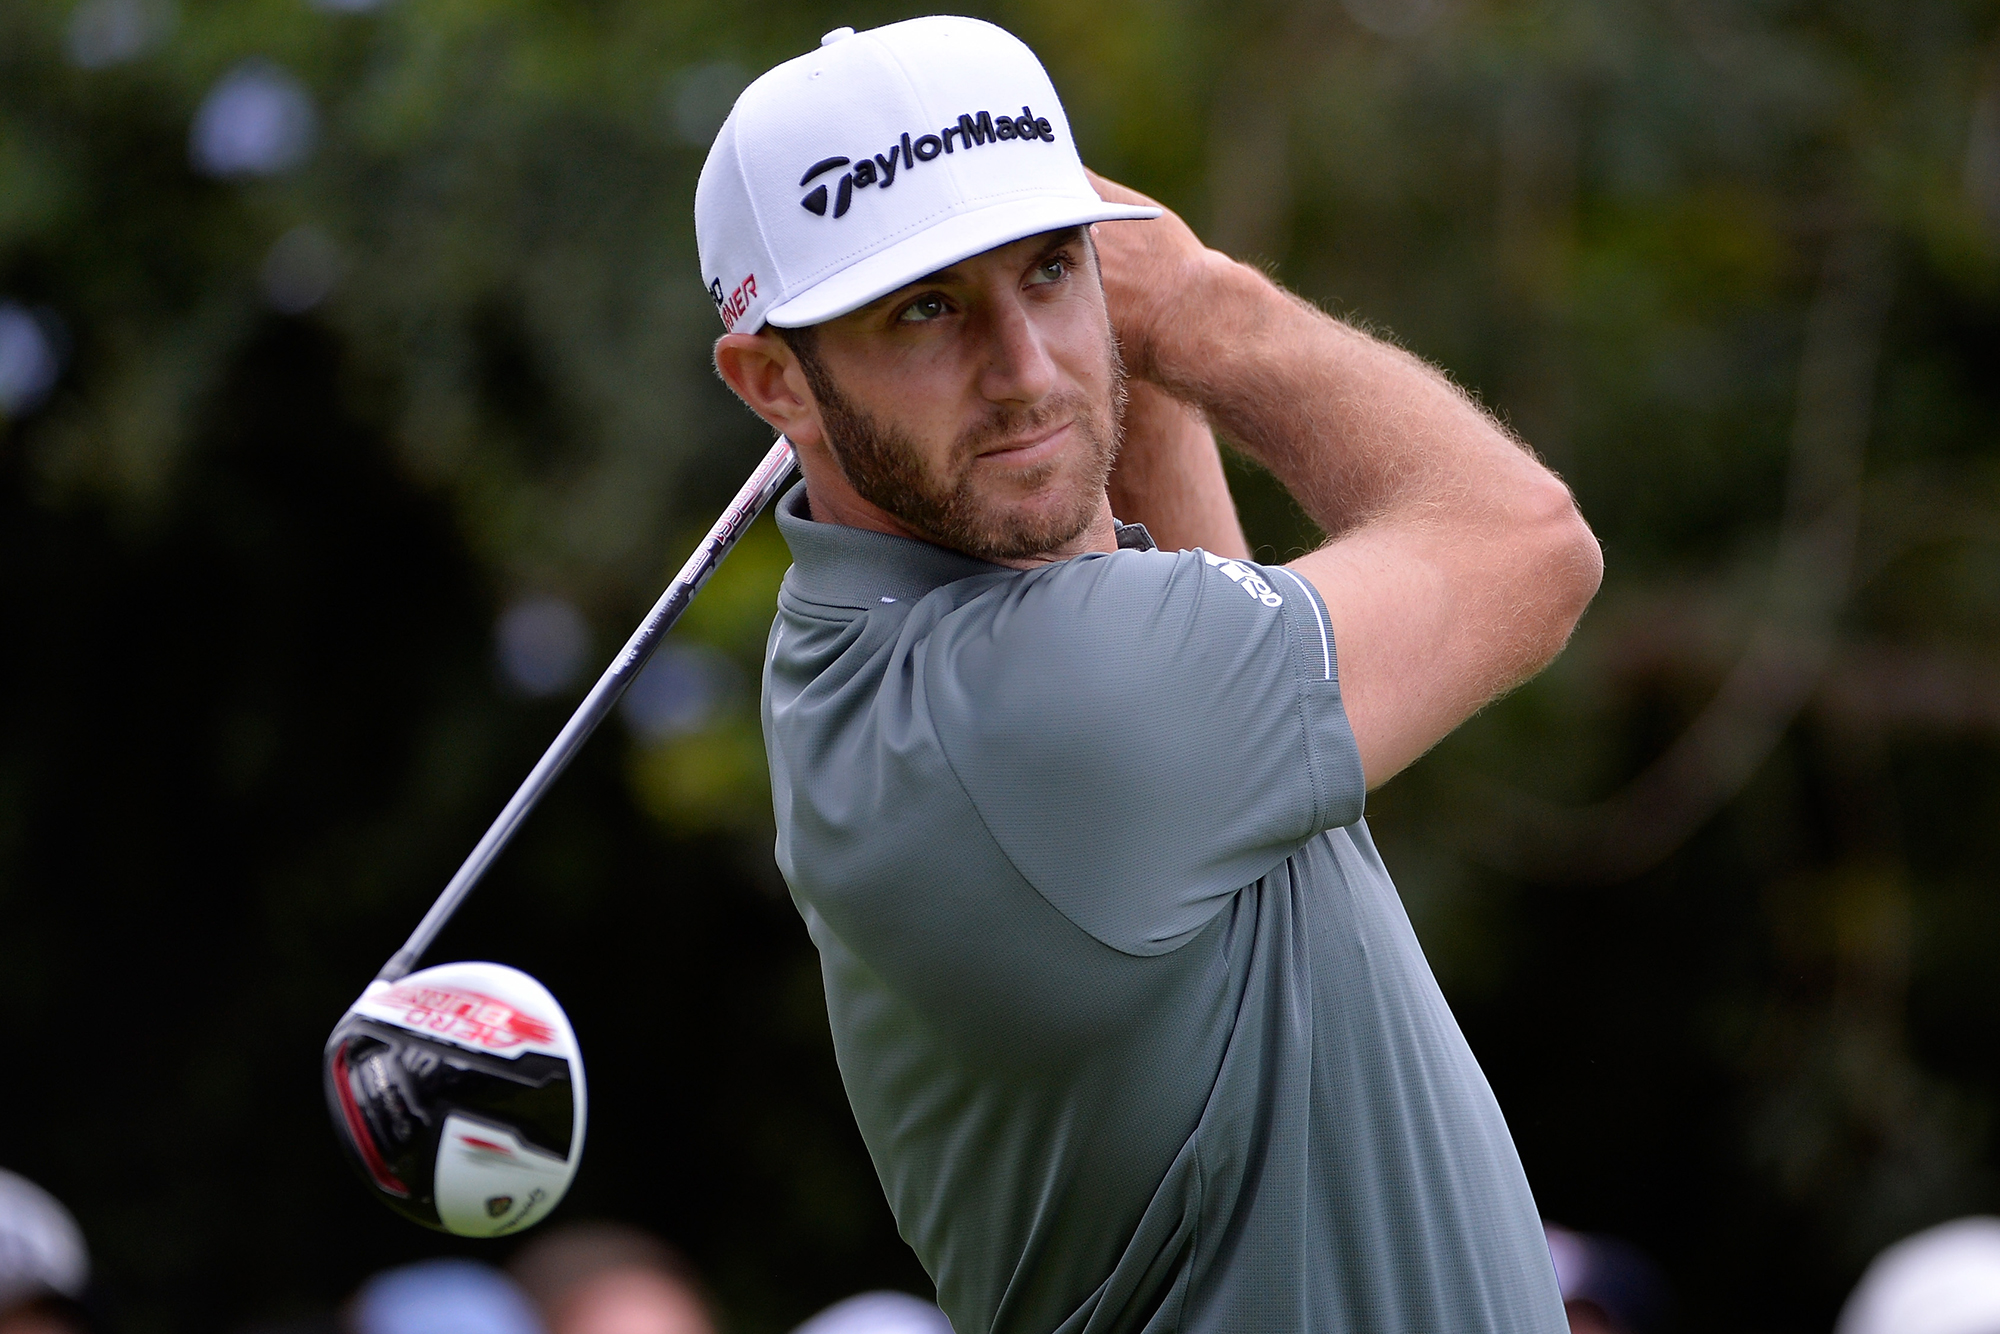 Johnson put the new TaylorMade AeroBurner driver in play three weeks ago